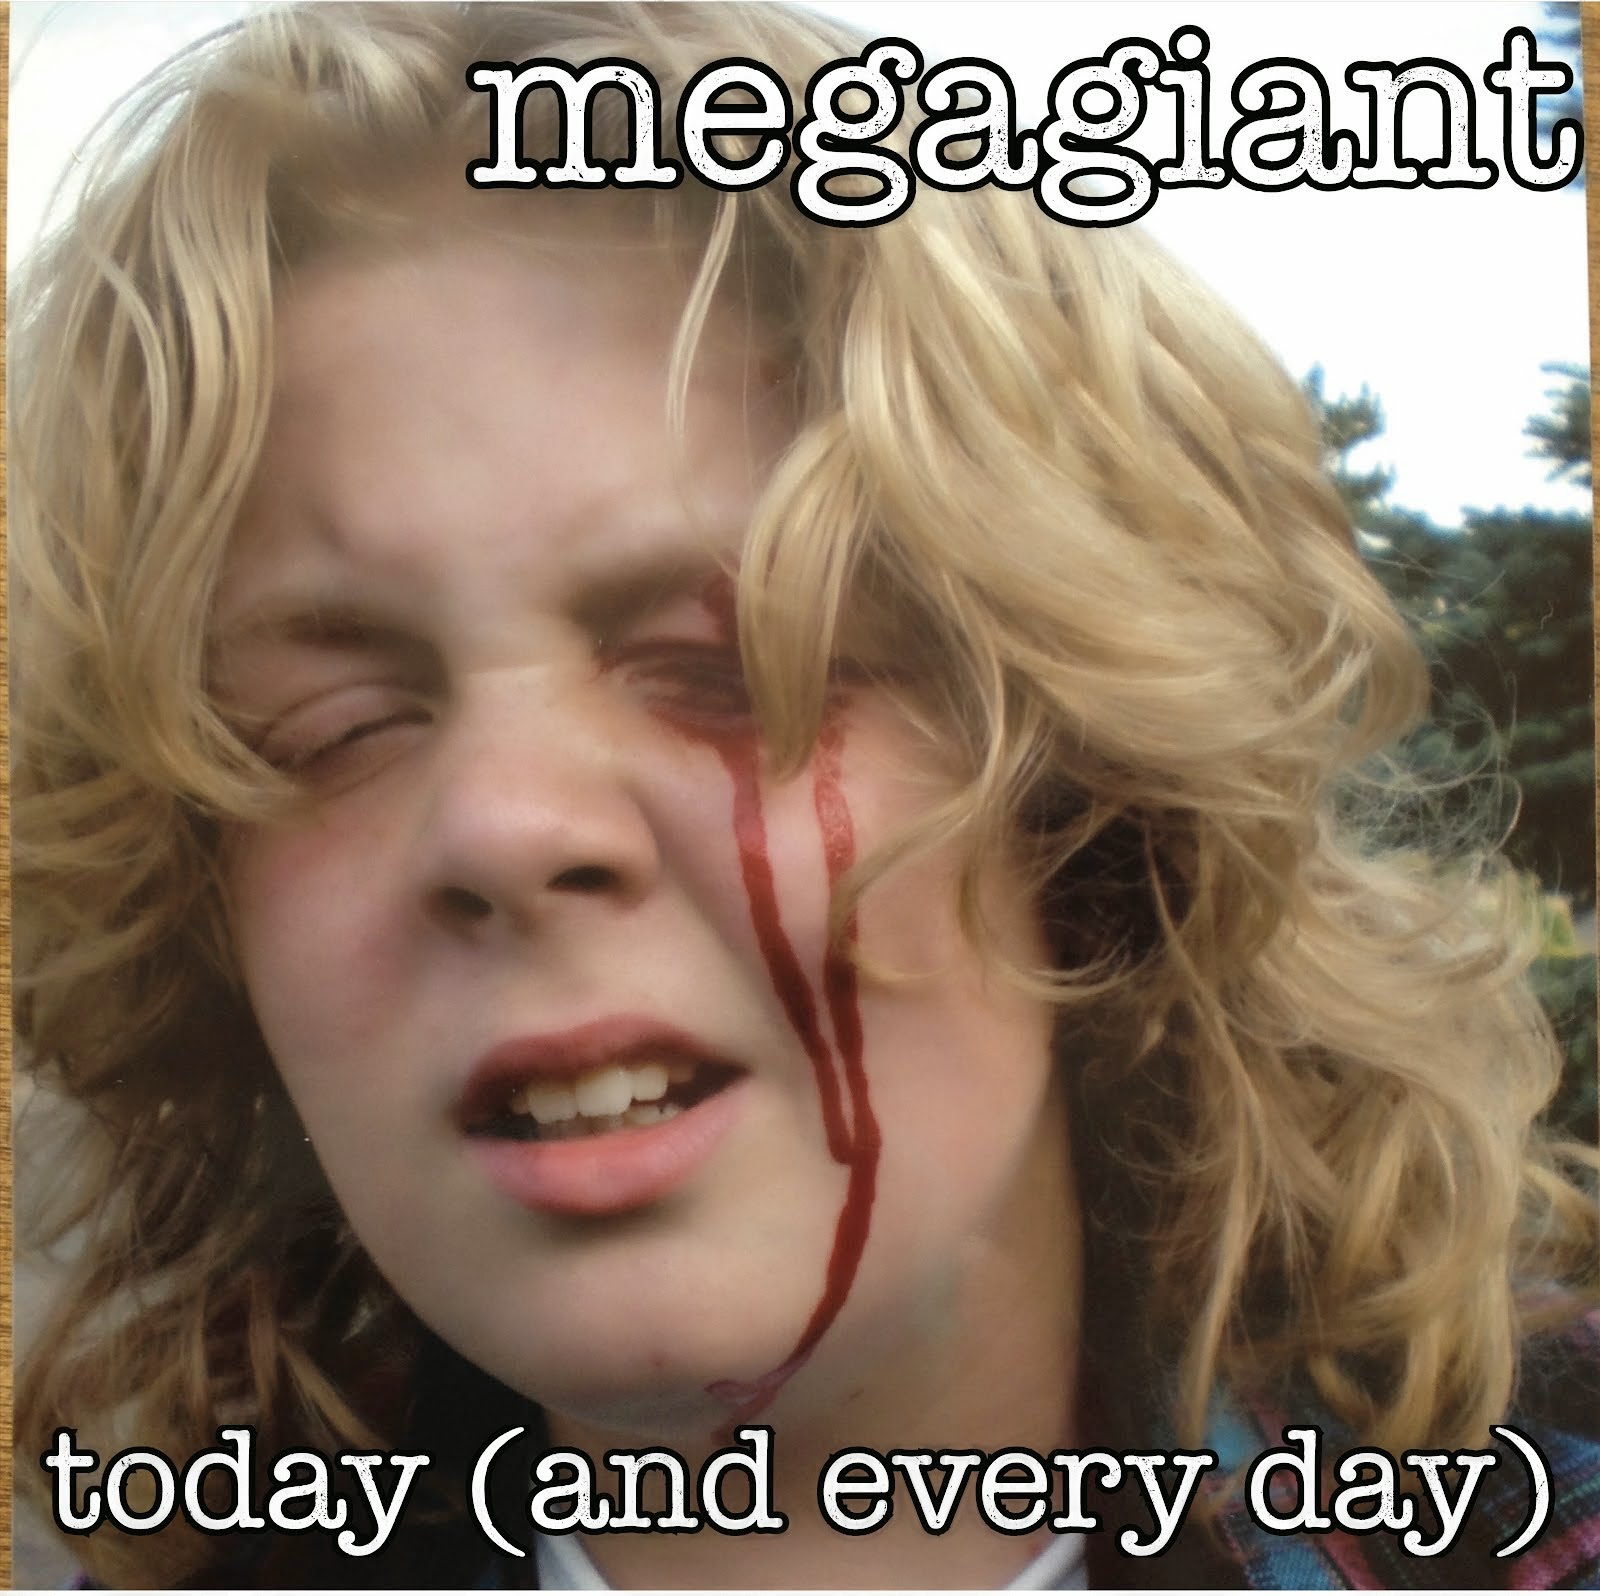 megagiant today (and every day)